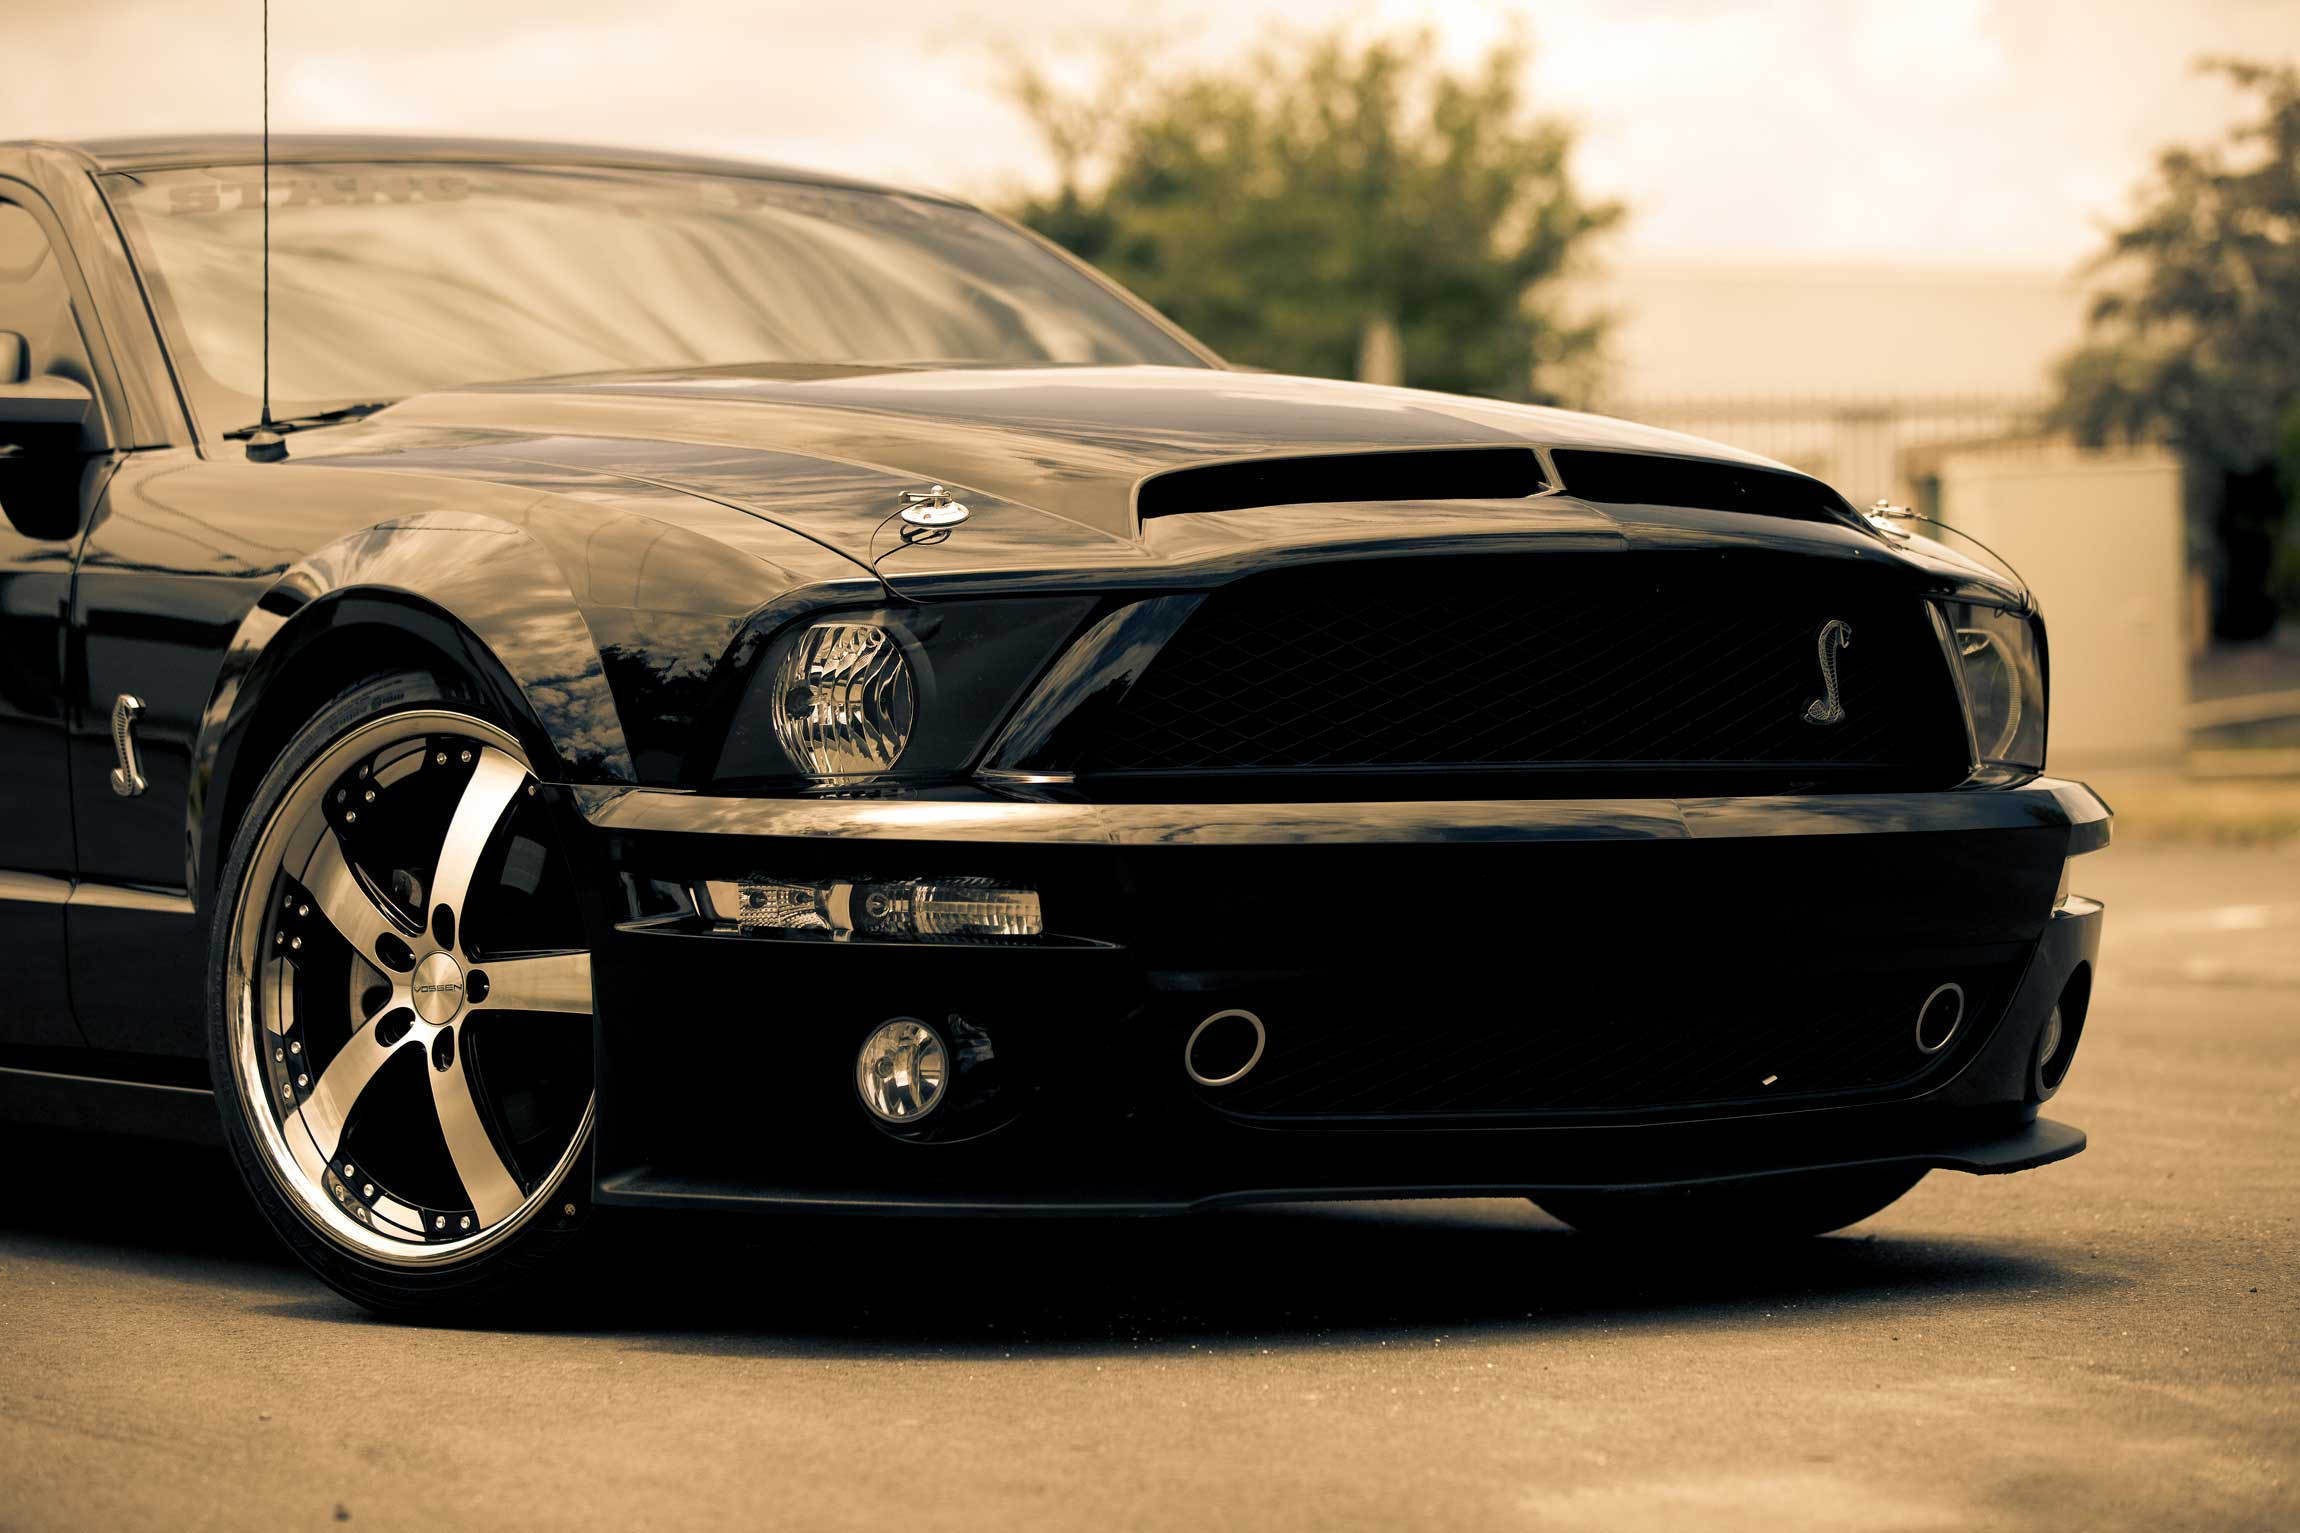 General 2300x1533 Shelby car Ford Ford Mustang black cars vehicle Ford Mustang S-197 muscle cars American cars